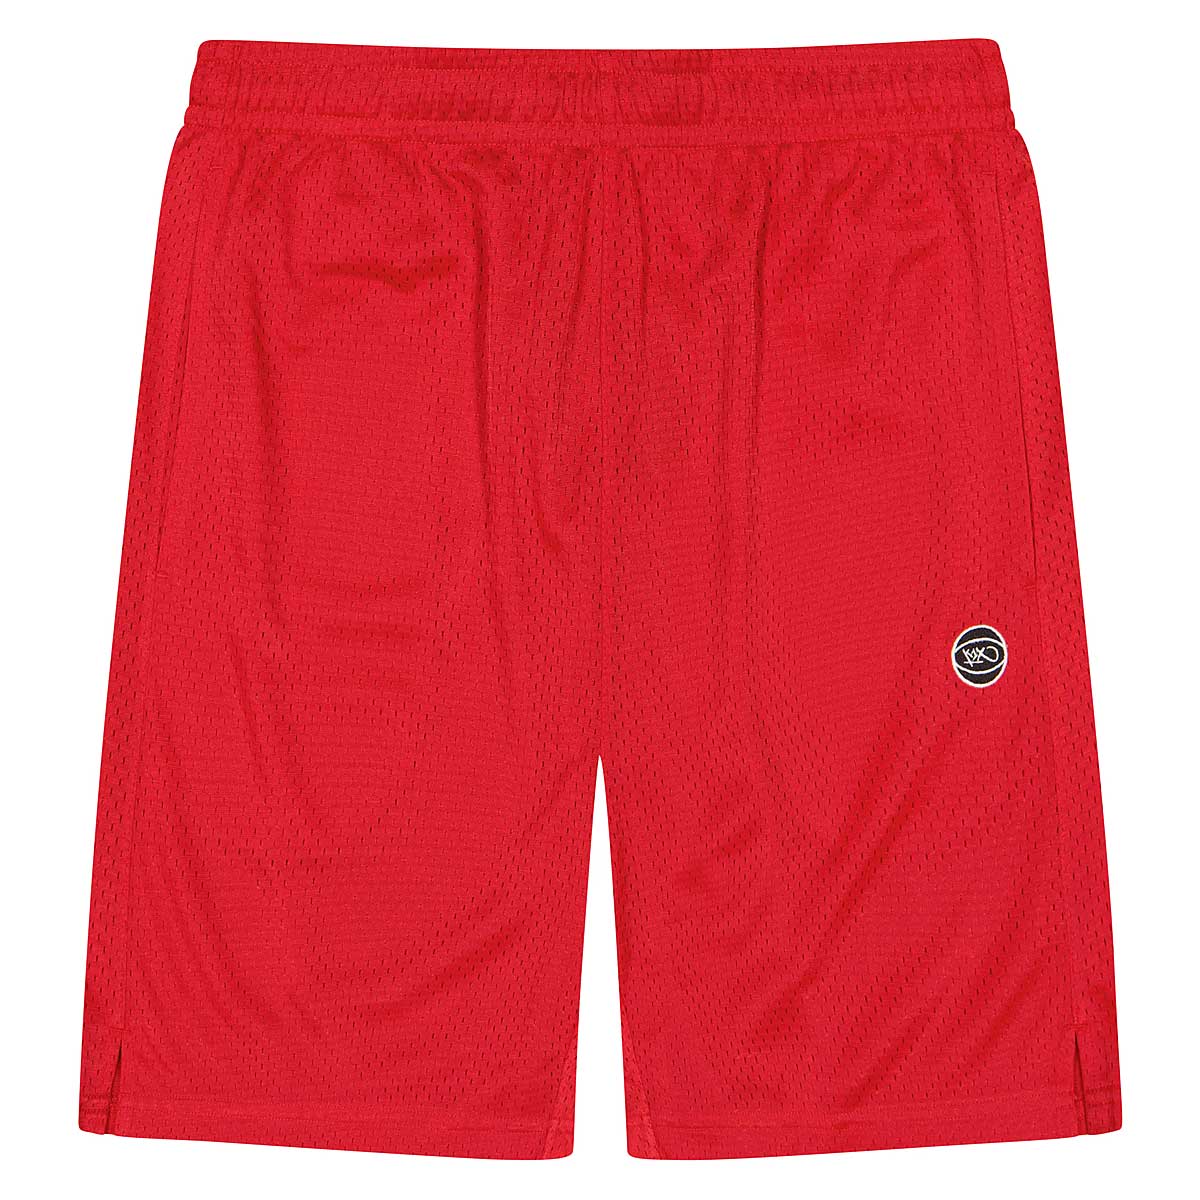 K1X Nos Oldschool Shorts, Wue Red/Wue Red